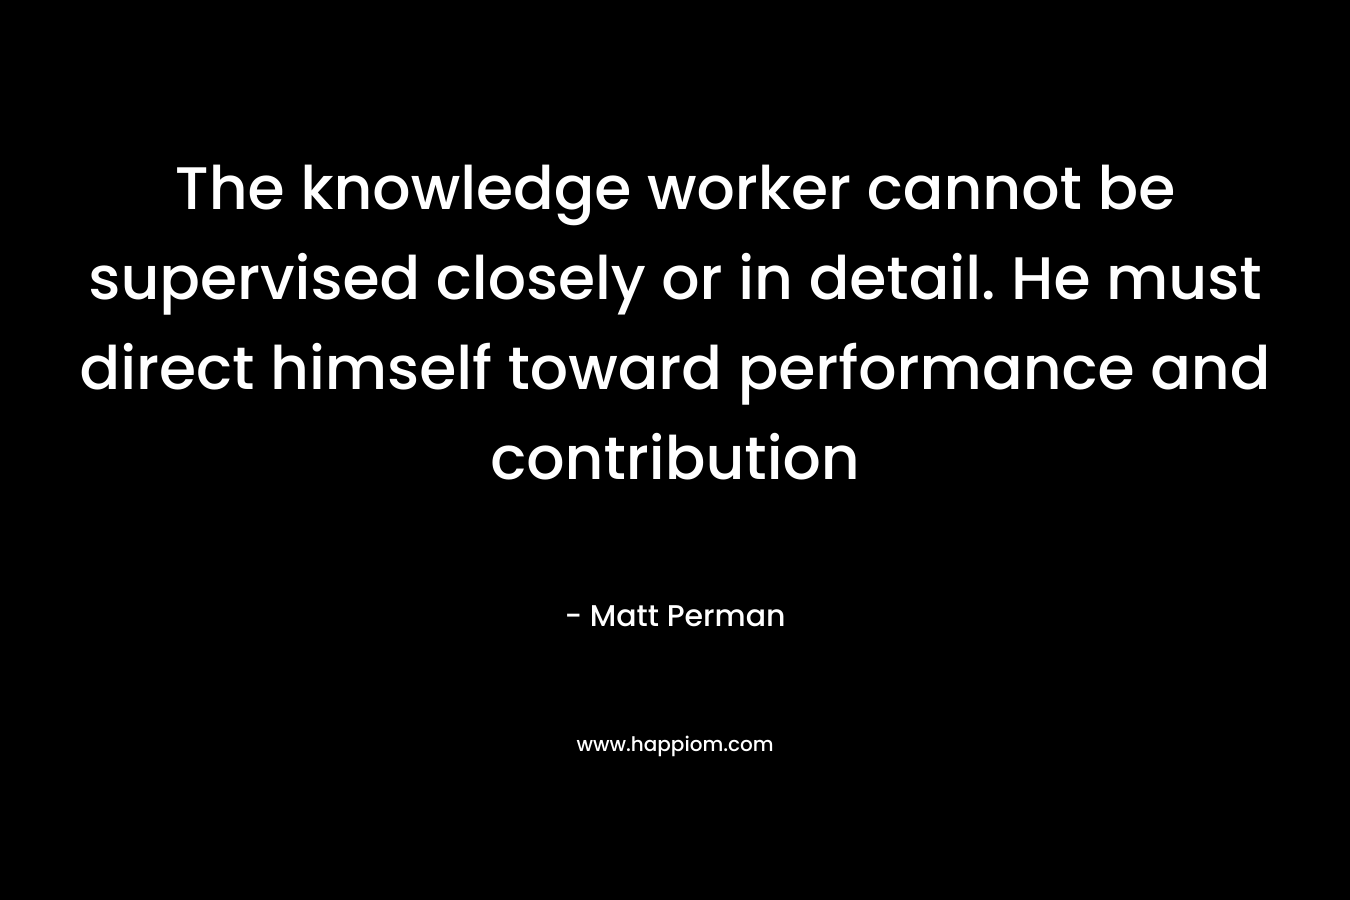 The knowledge worker cannot be supervised closely or in detail. He must direct himself toward performance and contribution – Matt Perman